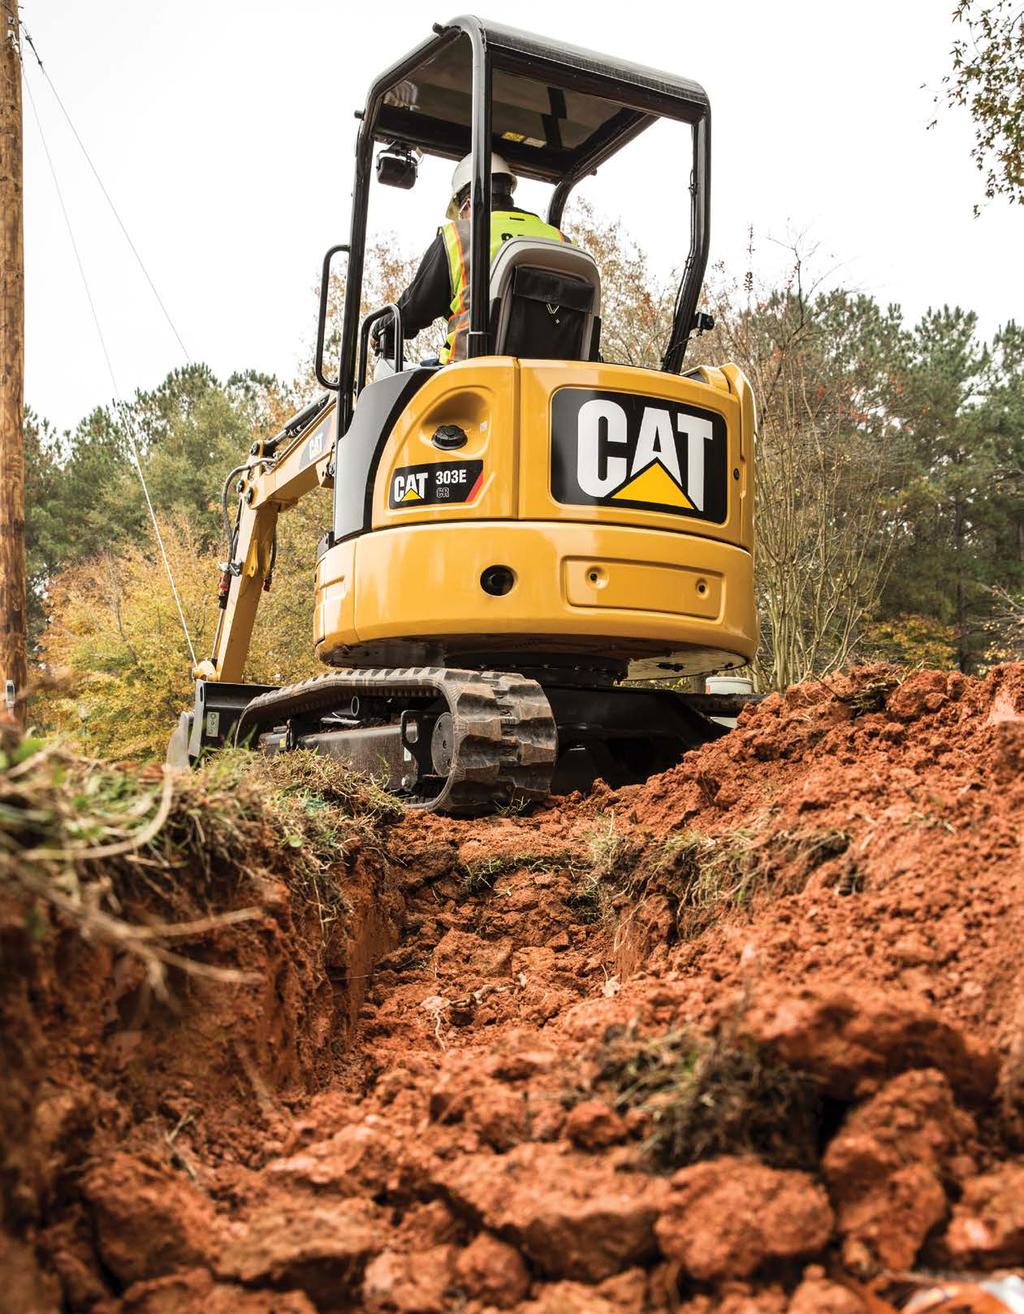 Compact and efficient design provides superior power on the jobsite.